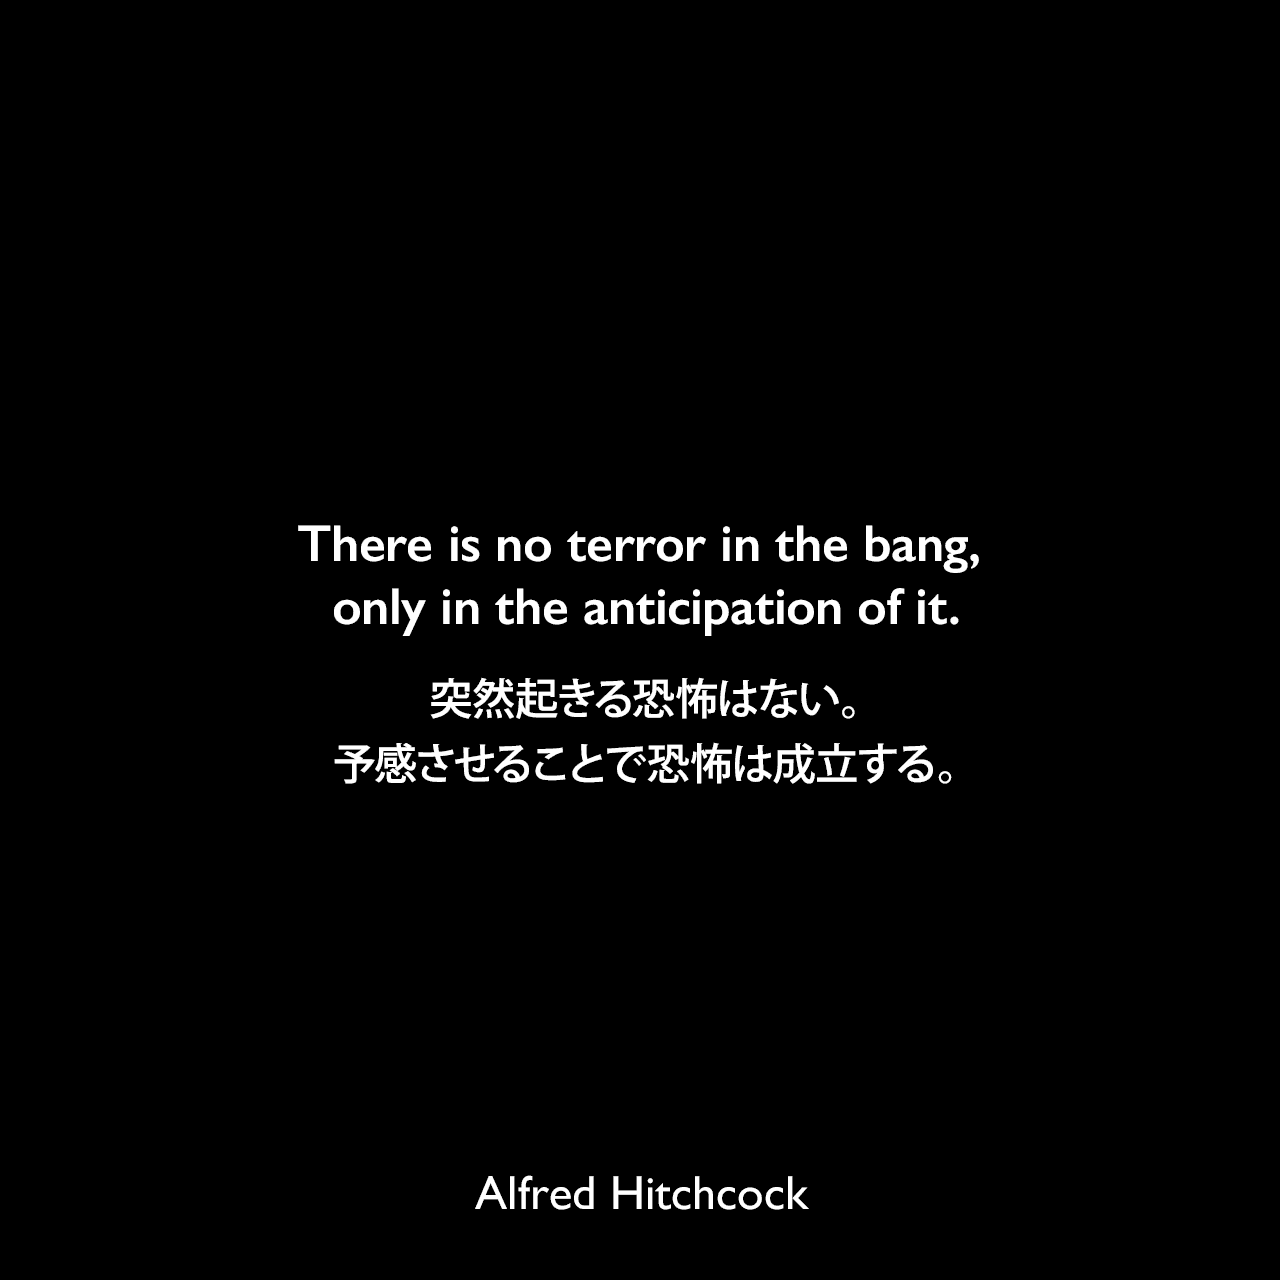 There is no terror in the bang, only in the anticipation of it.突然起きる恐怖はない。予感させることで恐怖は成立する。Alfred Hitchcock